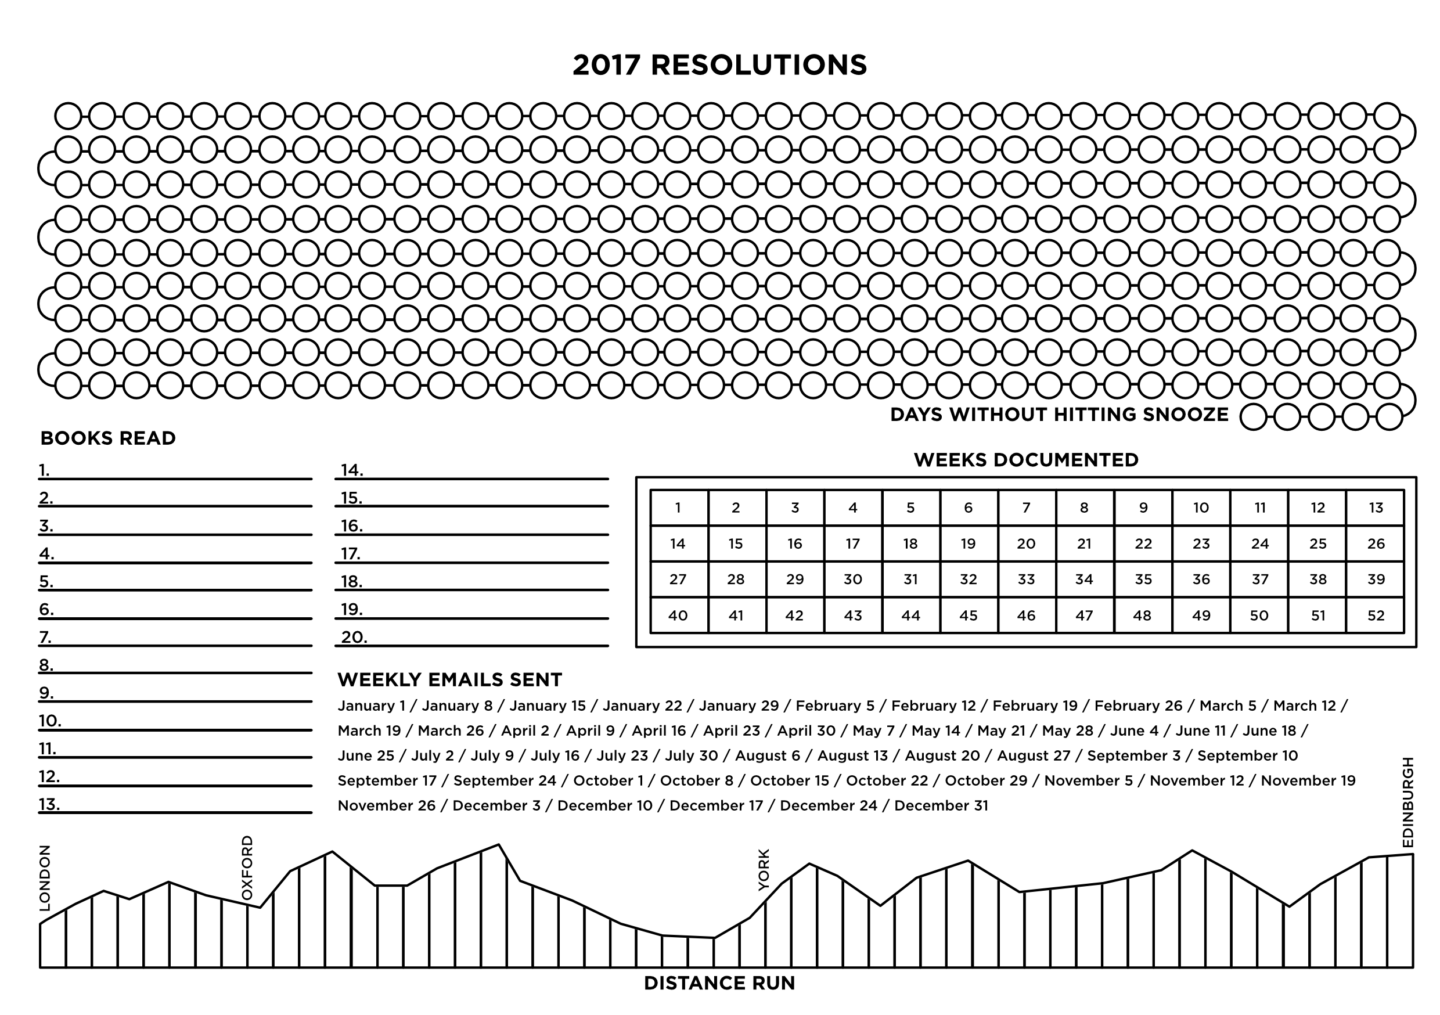 new year's resolutions poster 2017